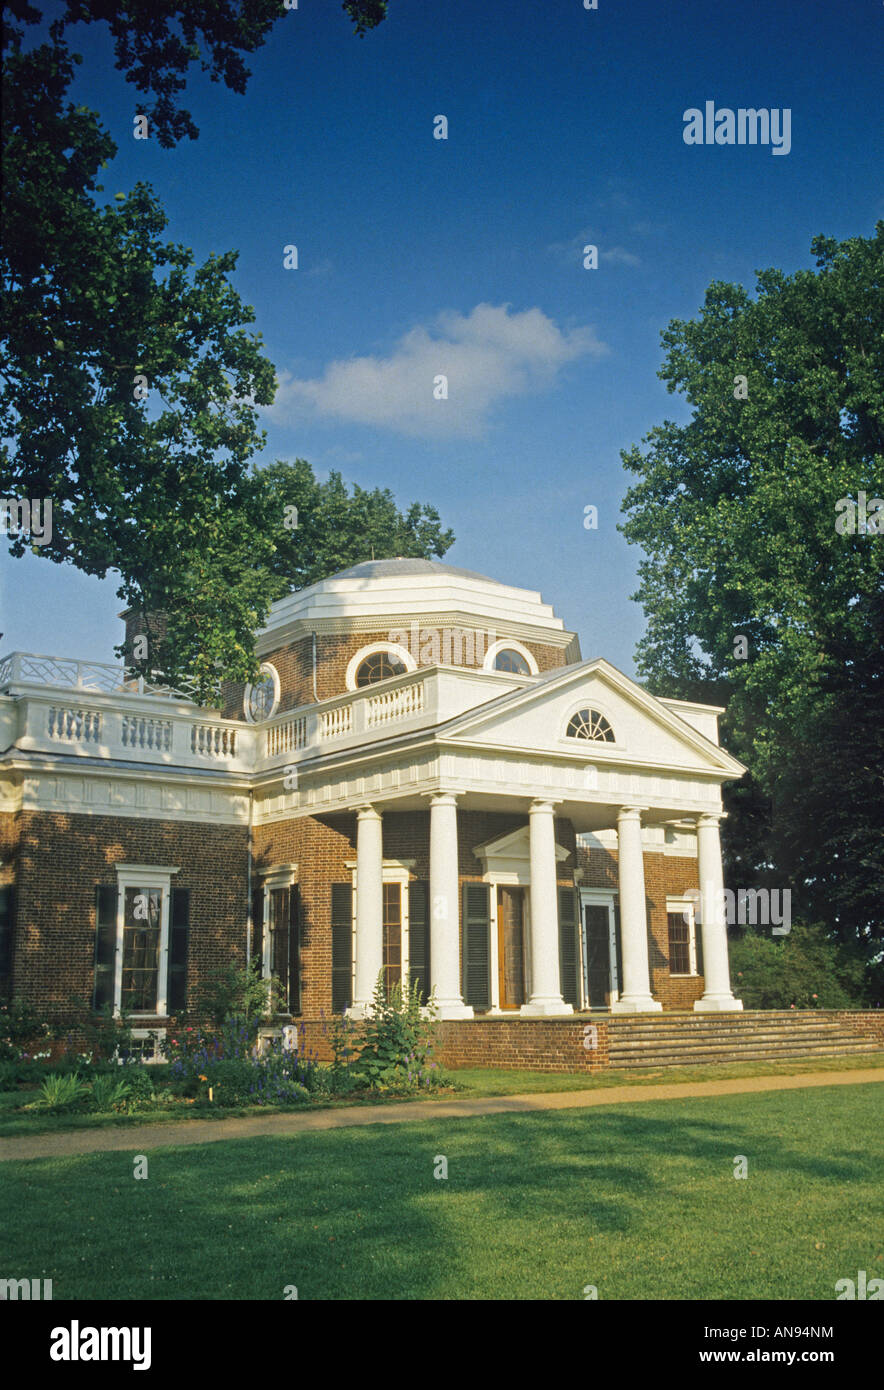 Monticello, home of Thomas Jefferson, third president of the USA, Charlottesville Virginia, colonial history. Stock Photo